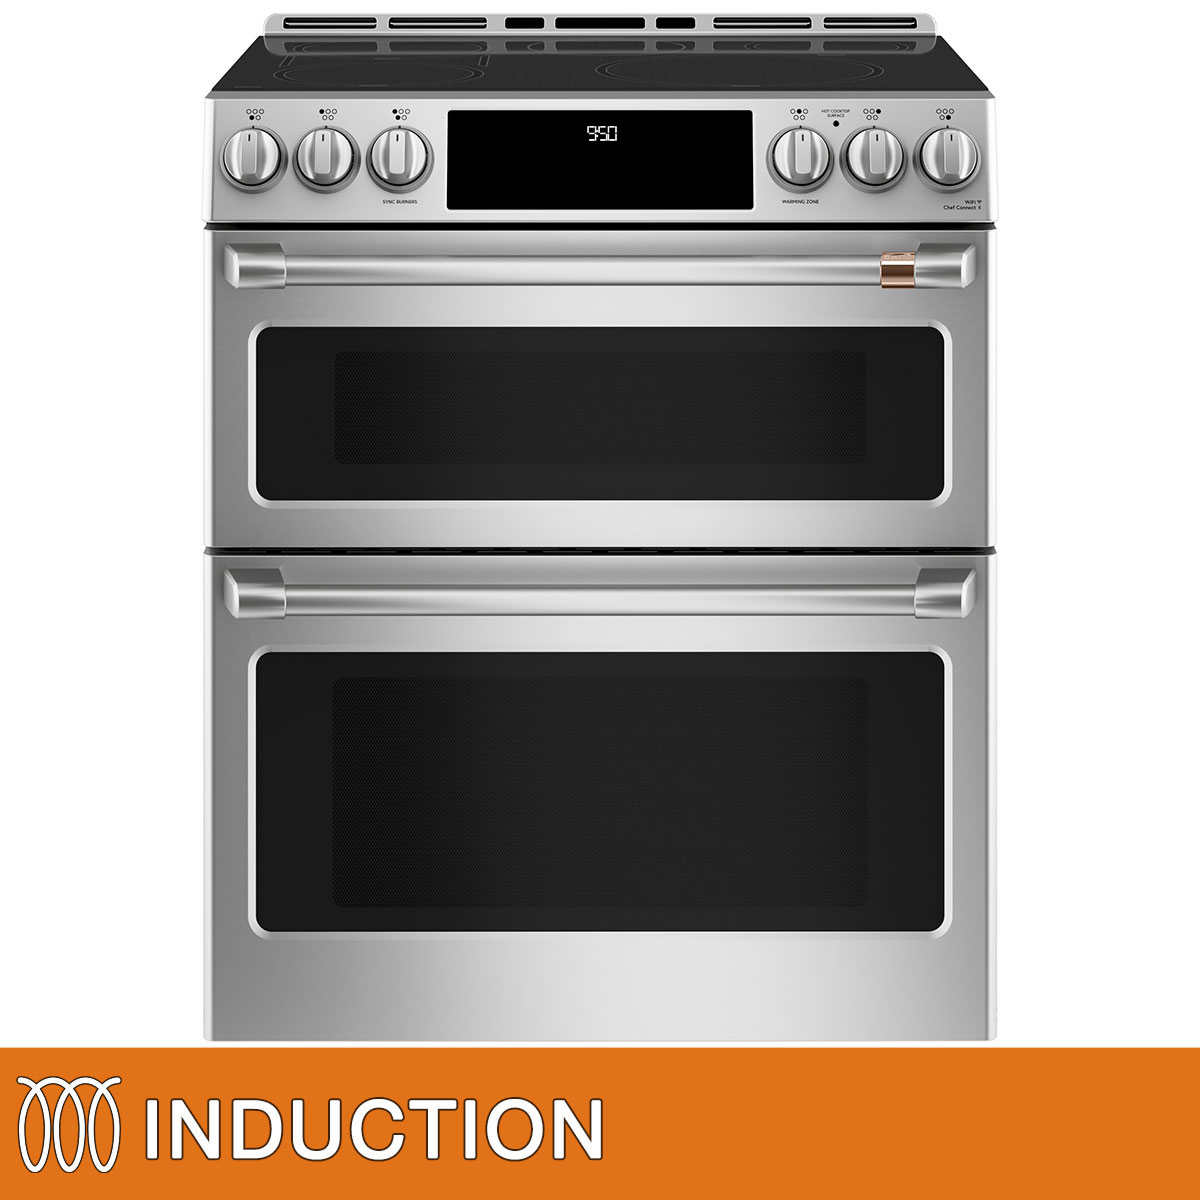 Café 30 Inch. 7.0 cu. ft. Slide-In Double Oven INDUCTION Range with Convection and WiFi Connect Stainless Steel Only + Free Shipping & Installation $2999.99 - Costco